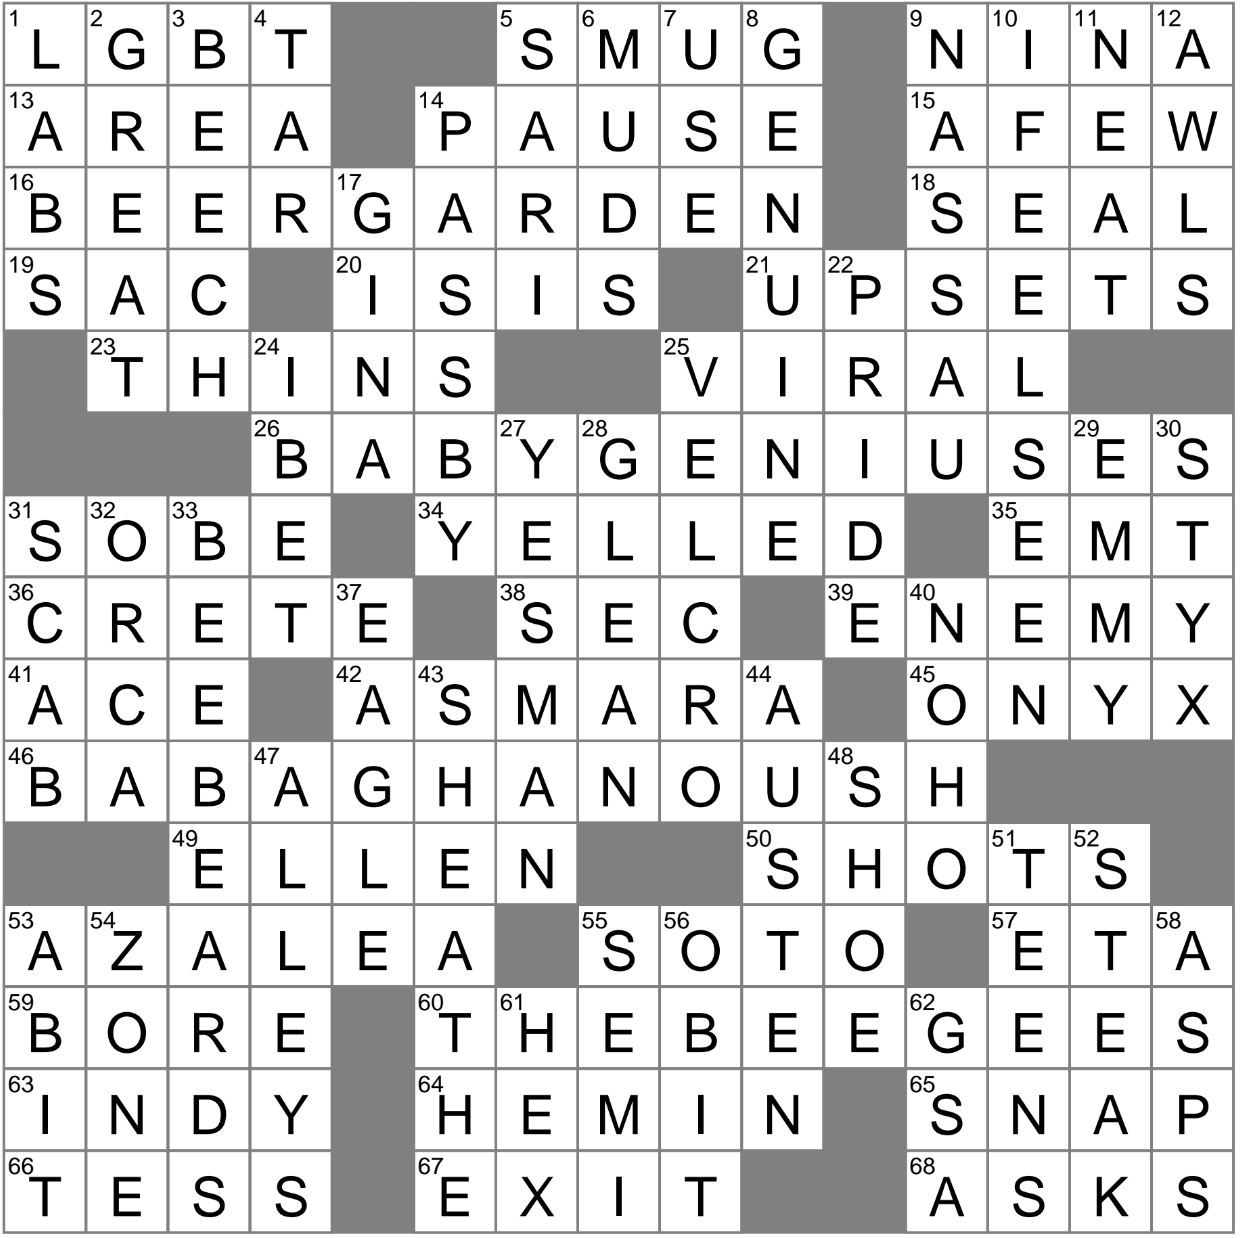 LA Times Crossword 9 Jan 23 Monday Knowledge and brain activity with